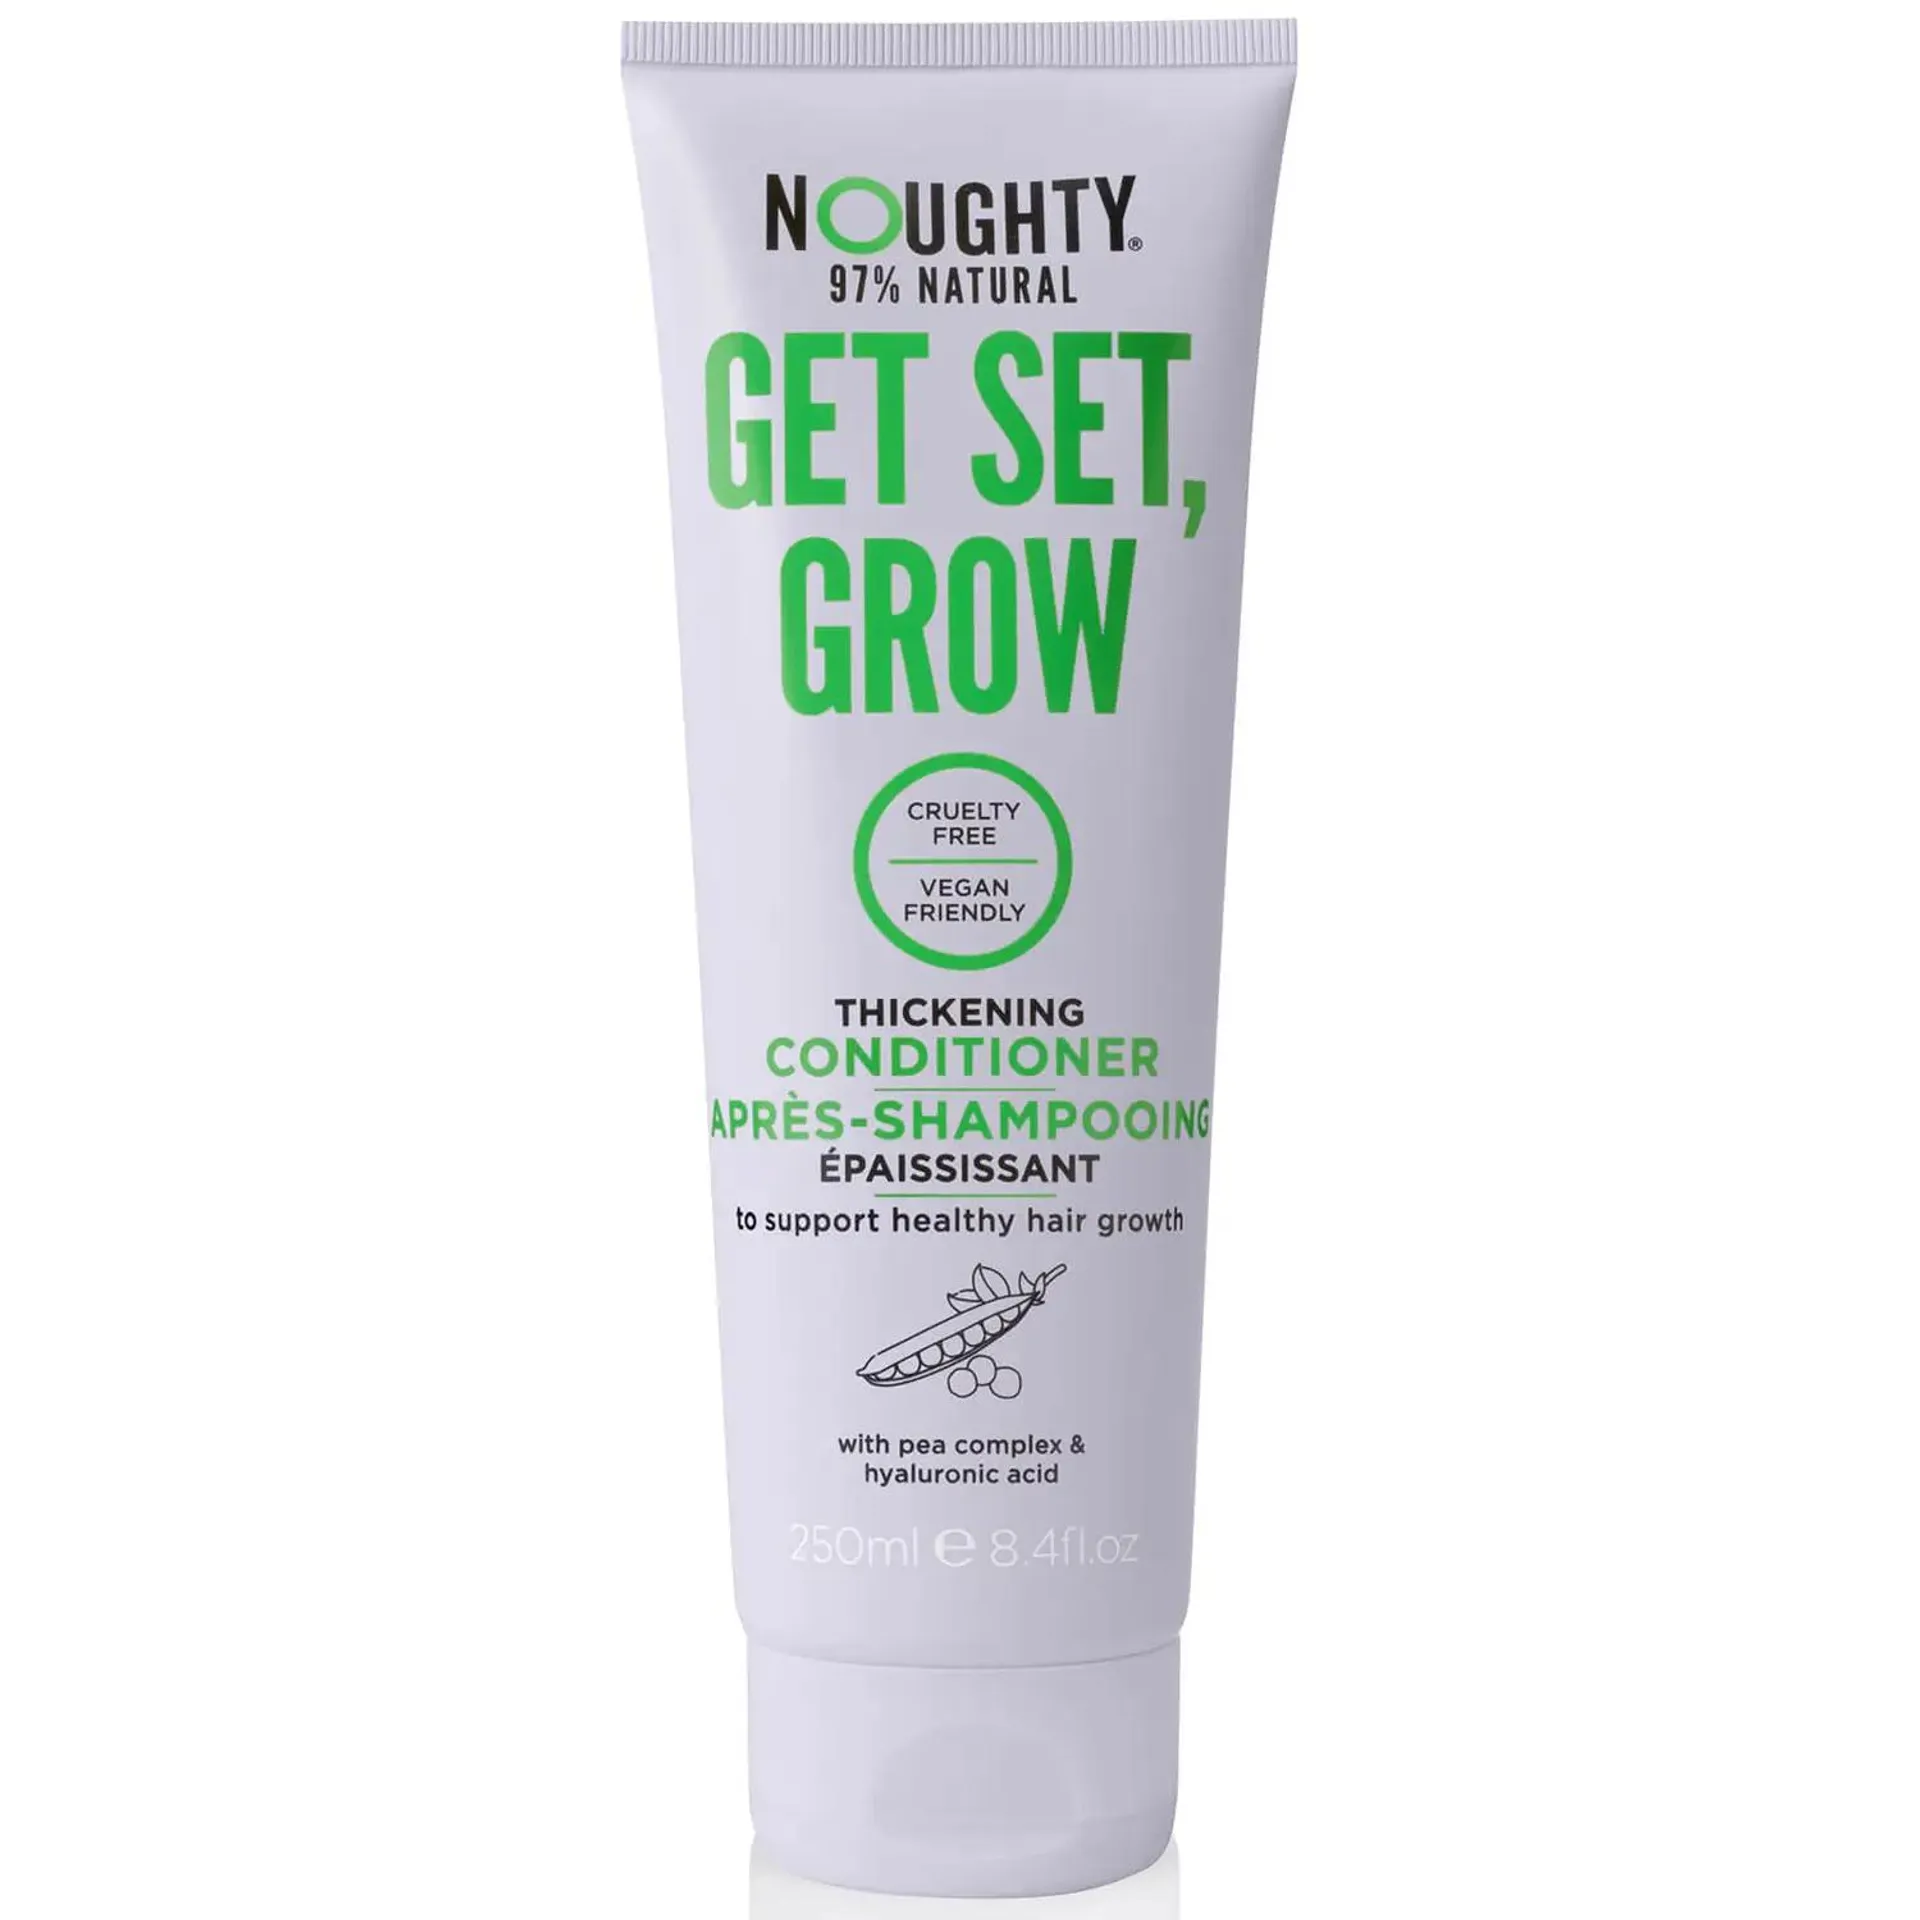 Noughty Get Set Grow Conditioner 250ml